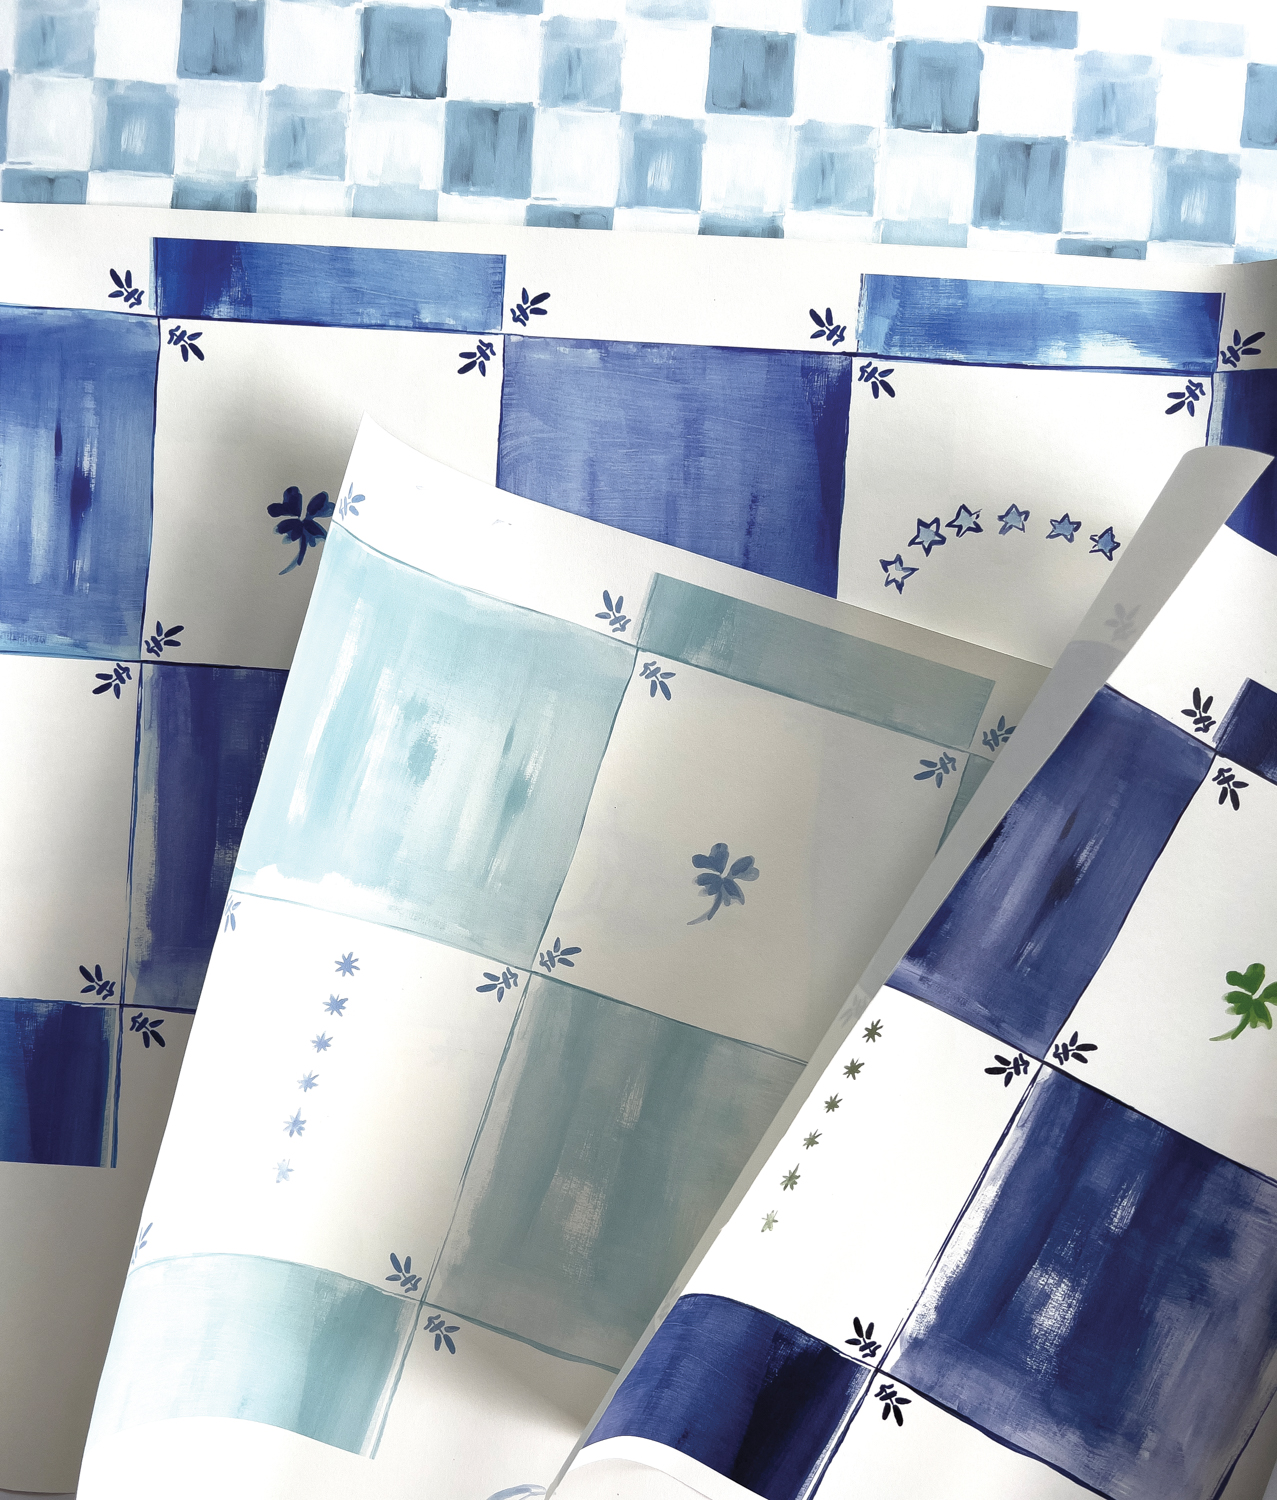 Wallcovering samples of blue-and-white checkered watercolor deigns featuring stars and clovers